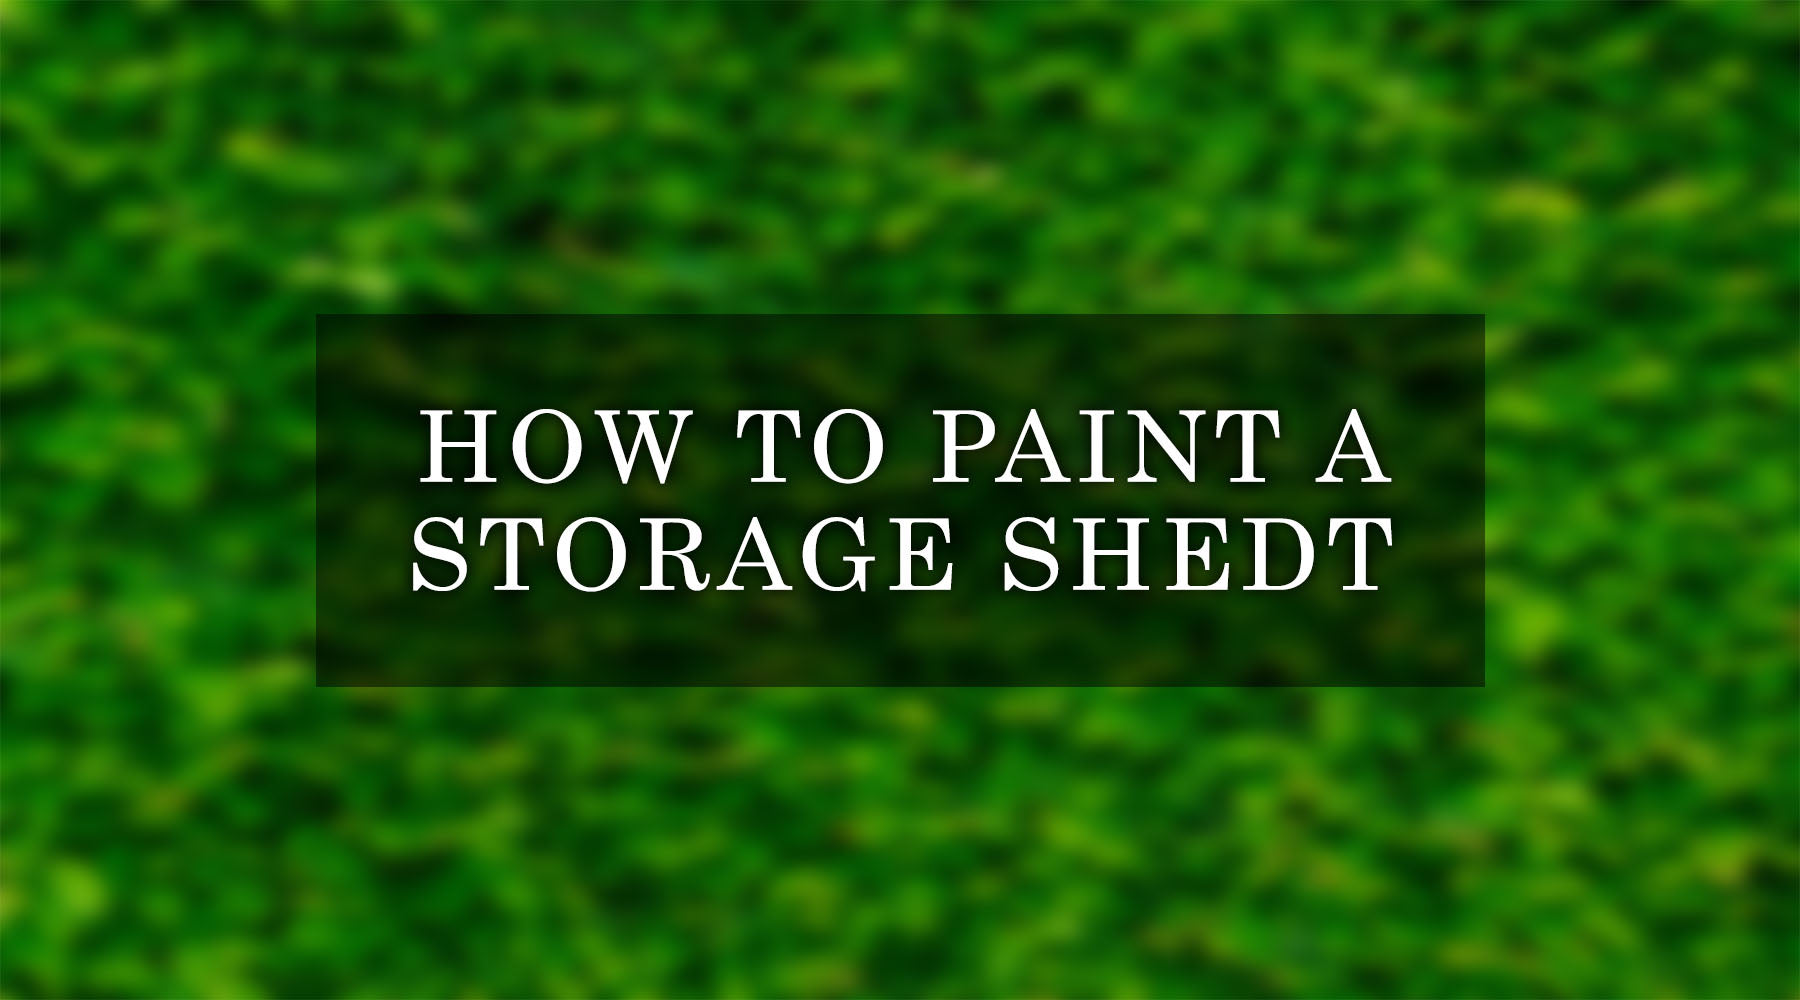 how to paint a storage shed - step by step guide